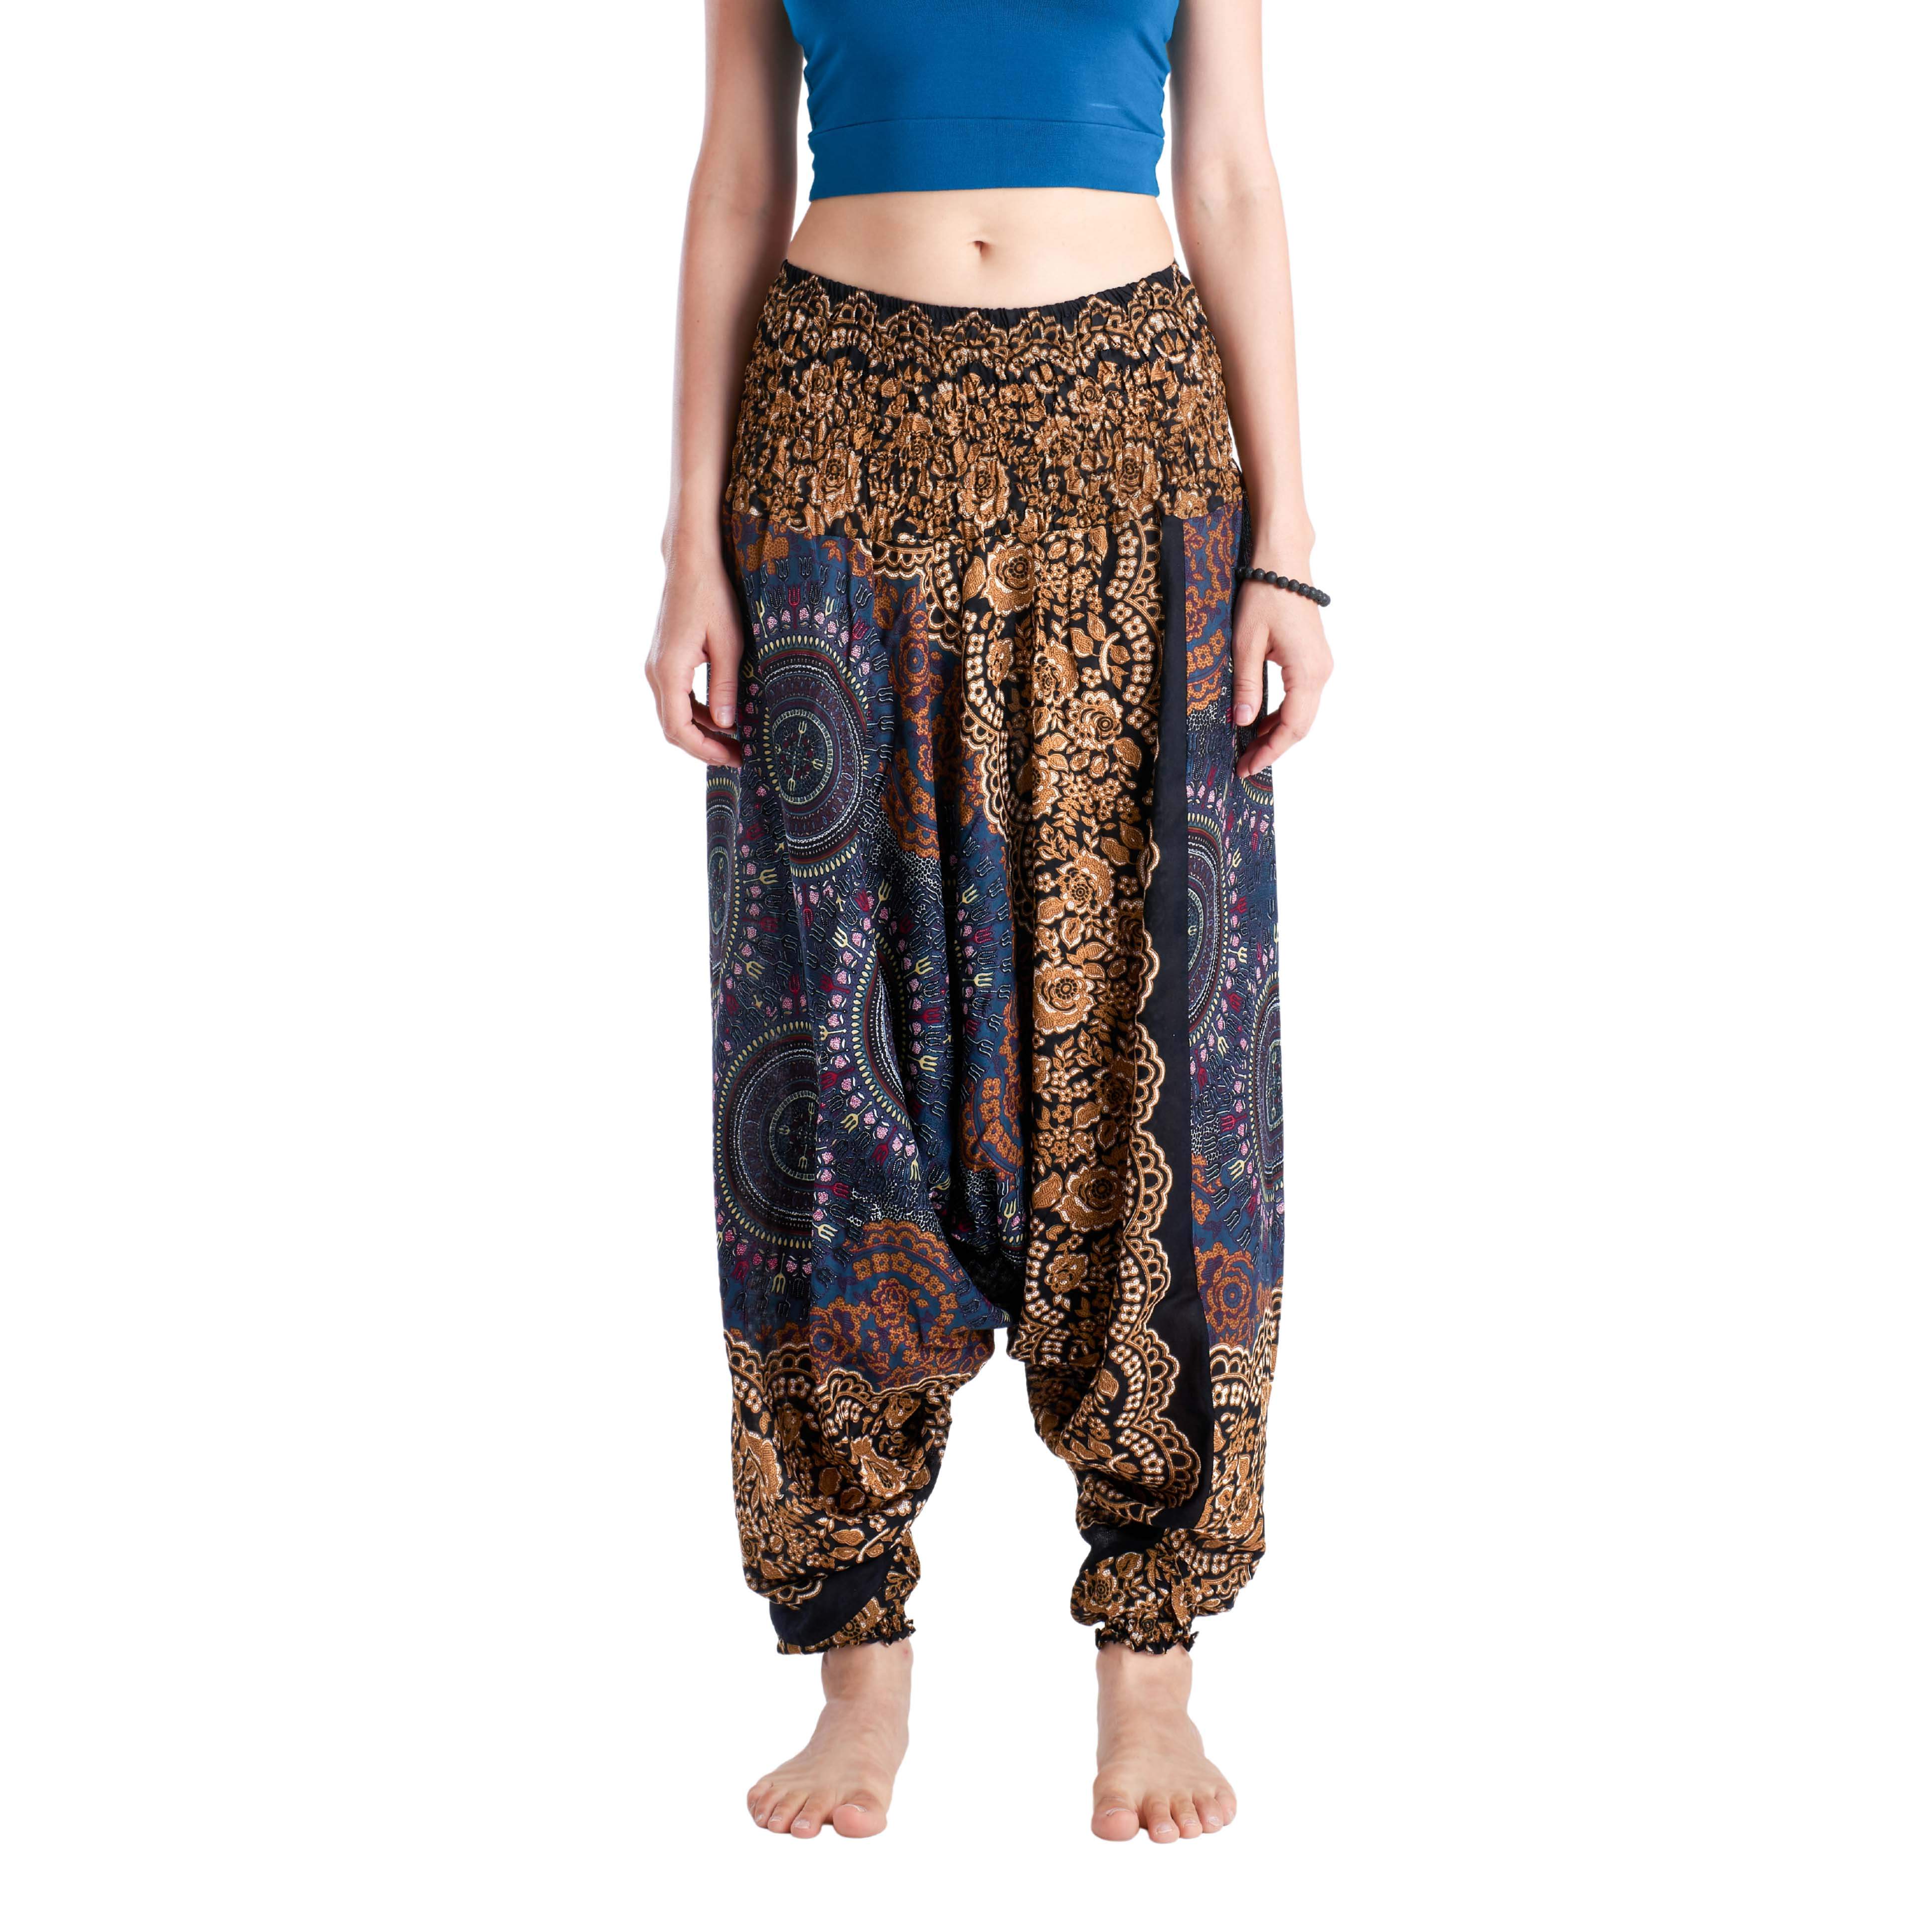 Yoga - Buy Today Elephant Pants Jewelry And Bohemian Clothes Handmade In Thailand Help To Save The Elephants FairTrade And Vegan